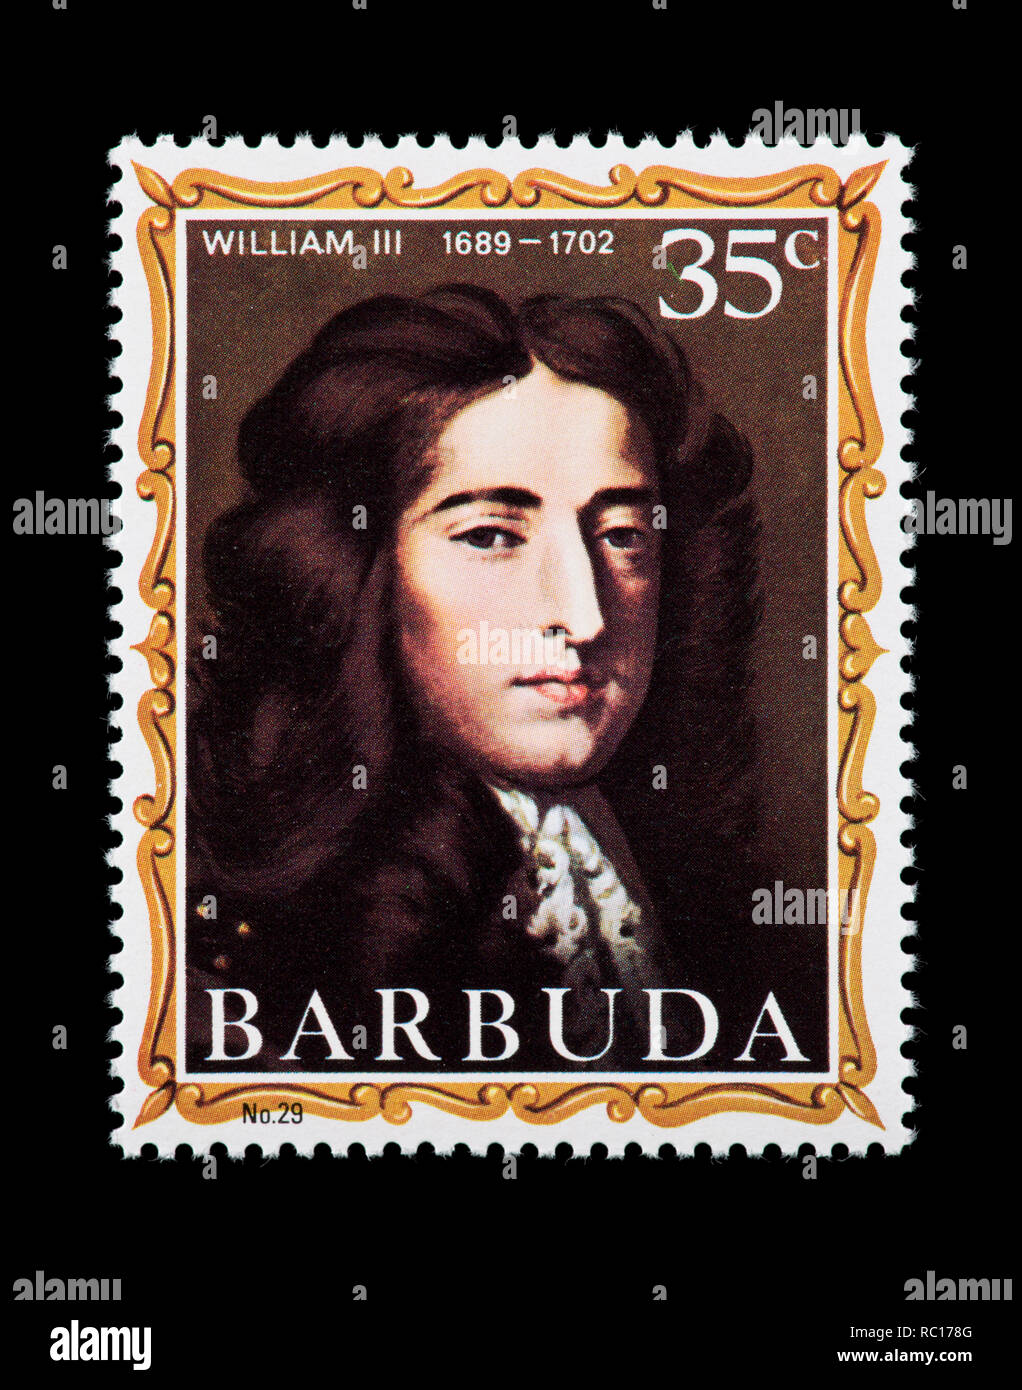 Postage stamp from Barbuda depicting William III, former king of England Stock Photo